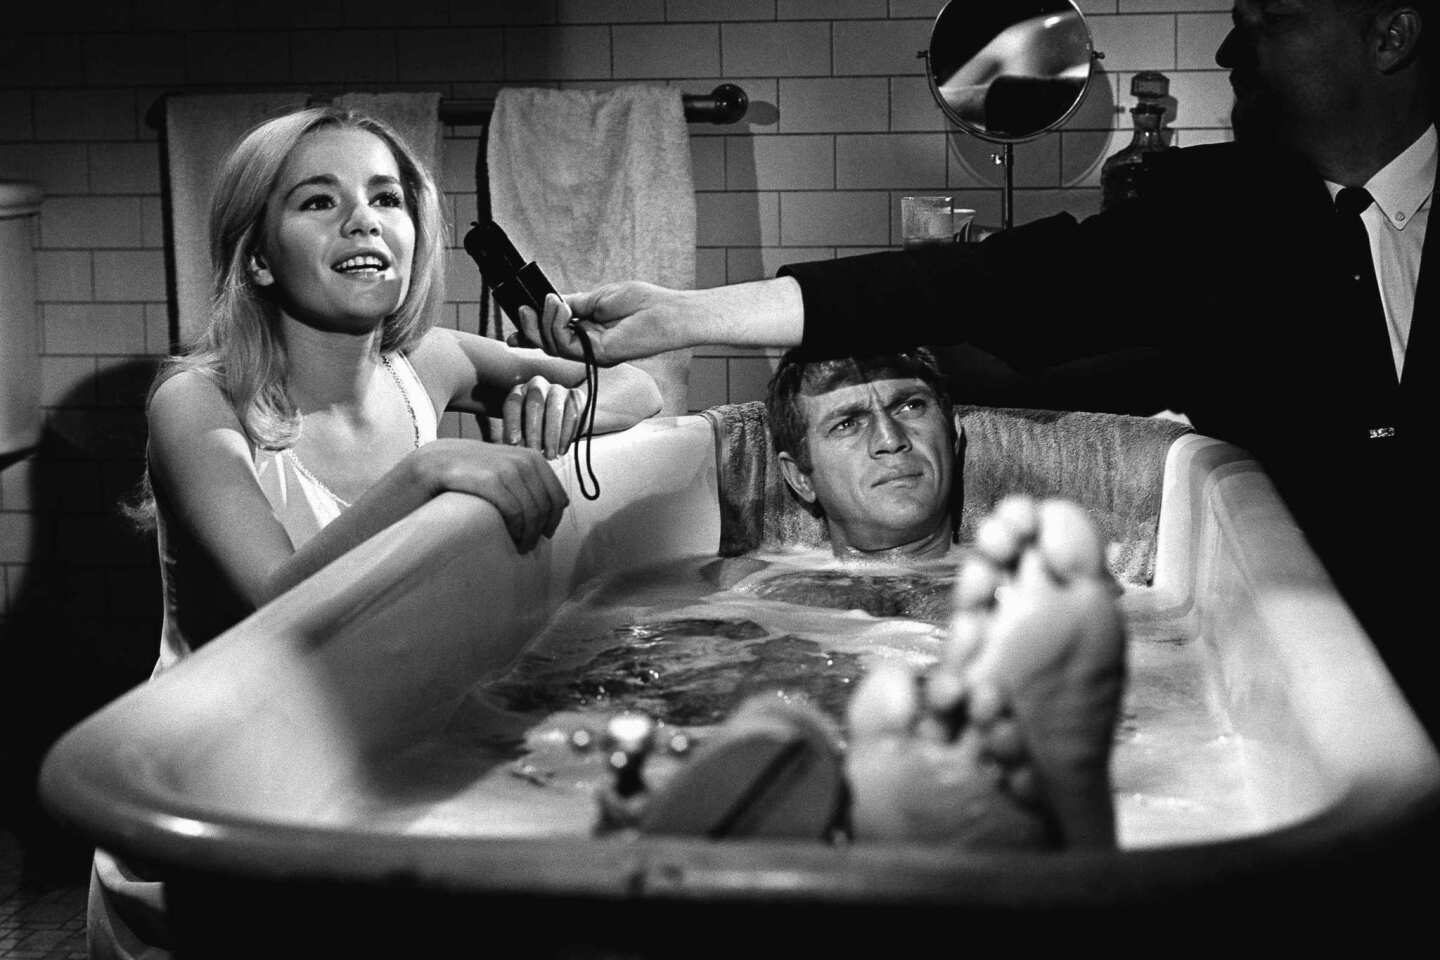 Tuesday Weld and Steve McQueen